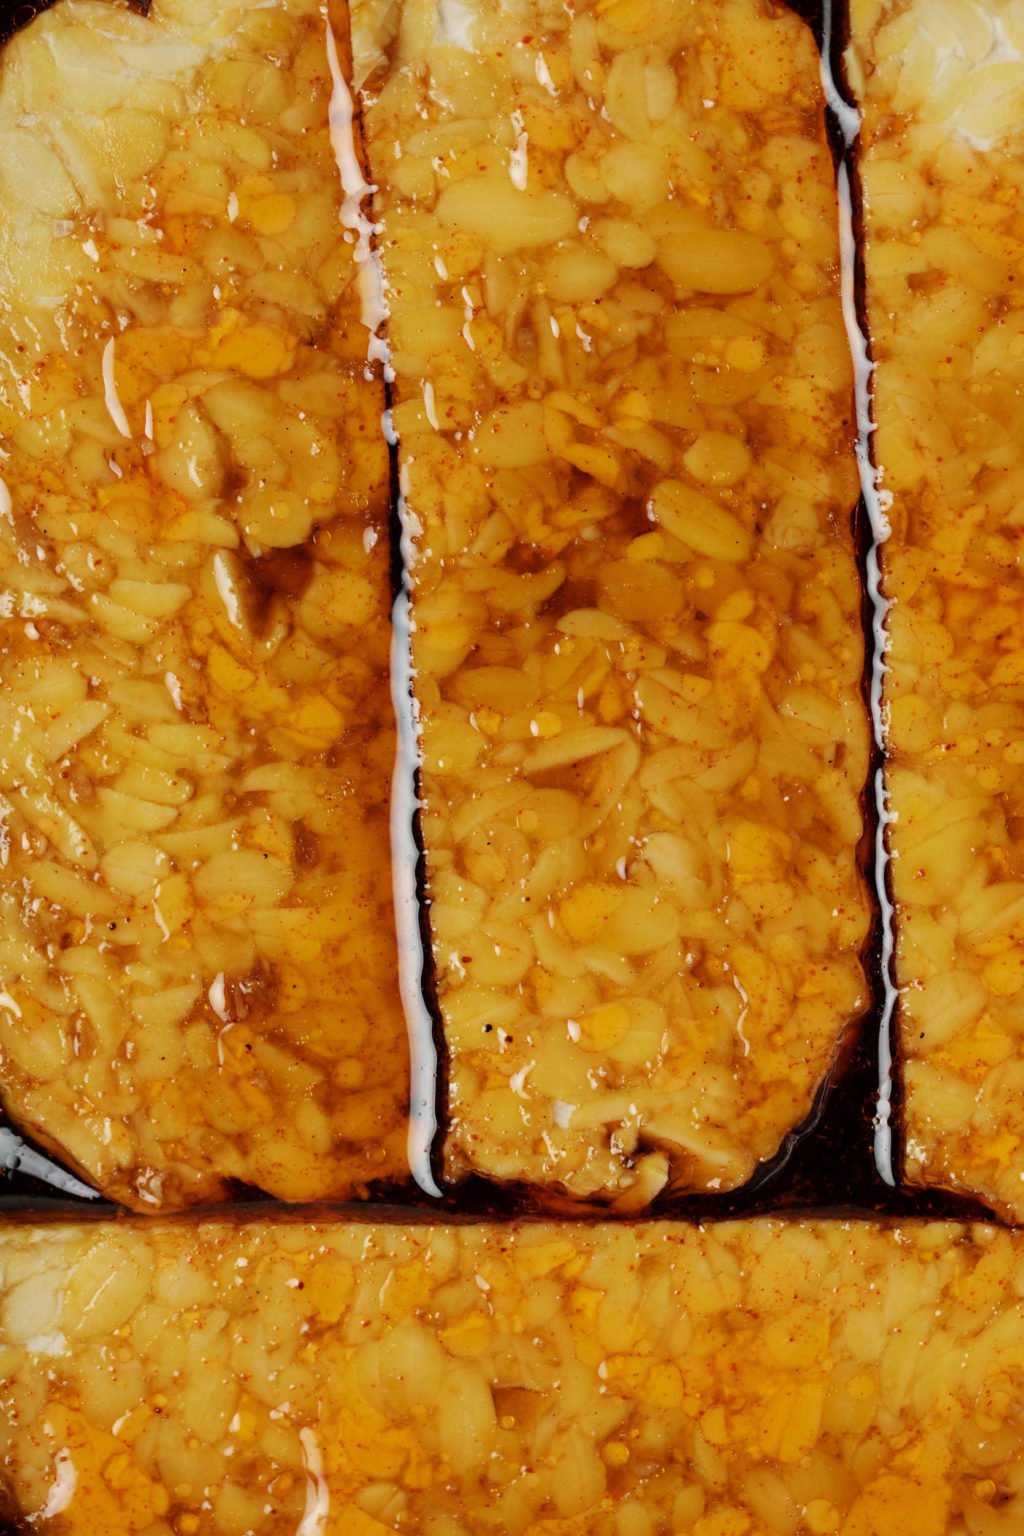 A close-up image of a plant-based protein, which is being marinated in a deep amber colored sauce.